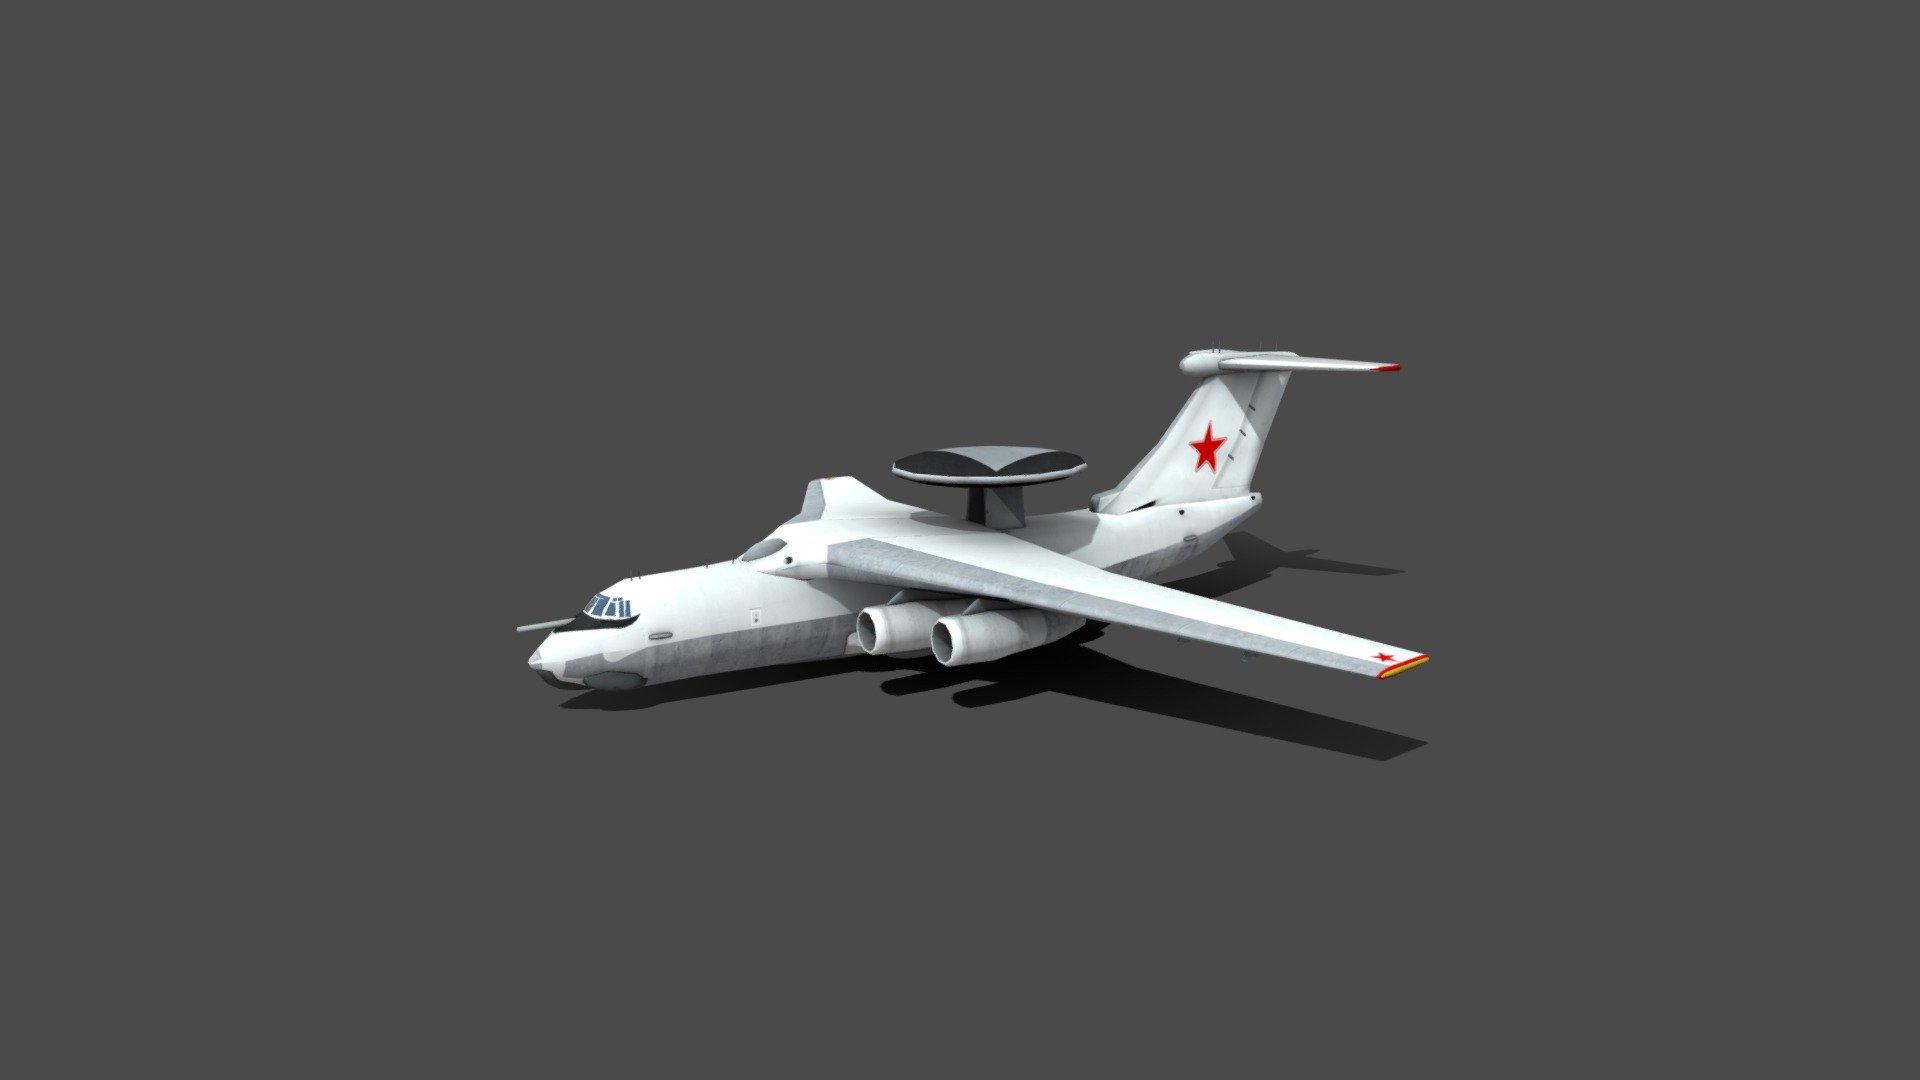 textures are in PNG format 2048x2048 1 diffuse low-poly ready to use in games

The Beriev A-50 is a Soviet airborne early warning and control aircraft based on the Ilyushin Il-76 transport. The existence of the A-50 was revealed to the Western Bloc in 1980 by Adolf Tolkachev. Developed to replace the Tupolev Tu-126 &ldquo;Moss